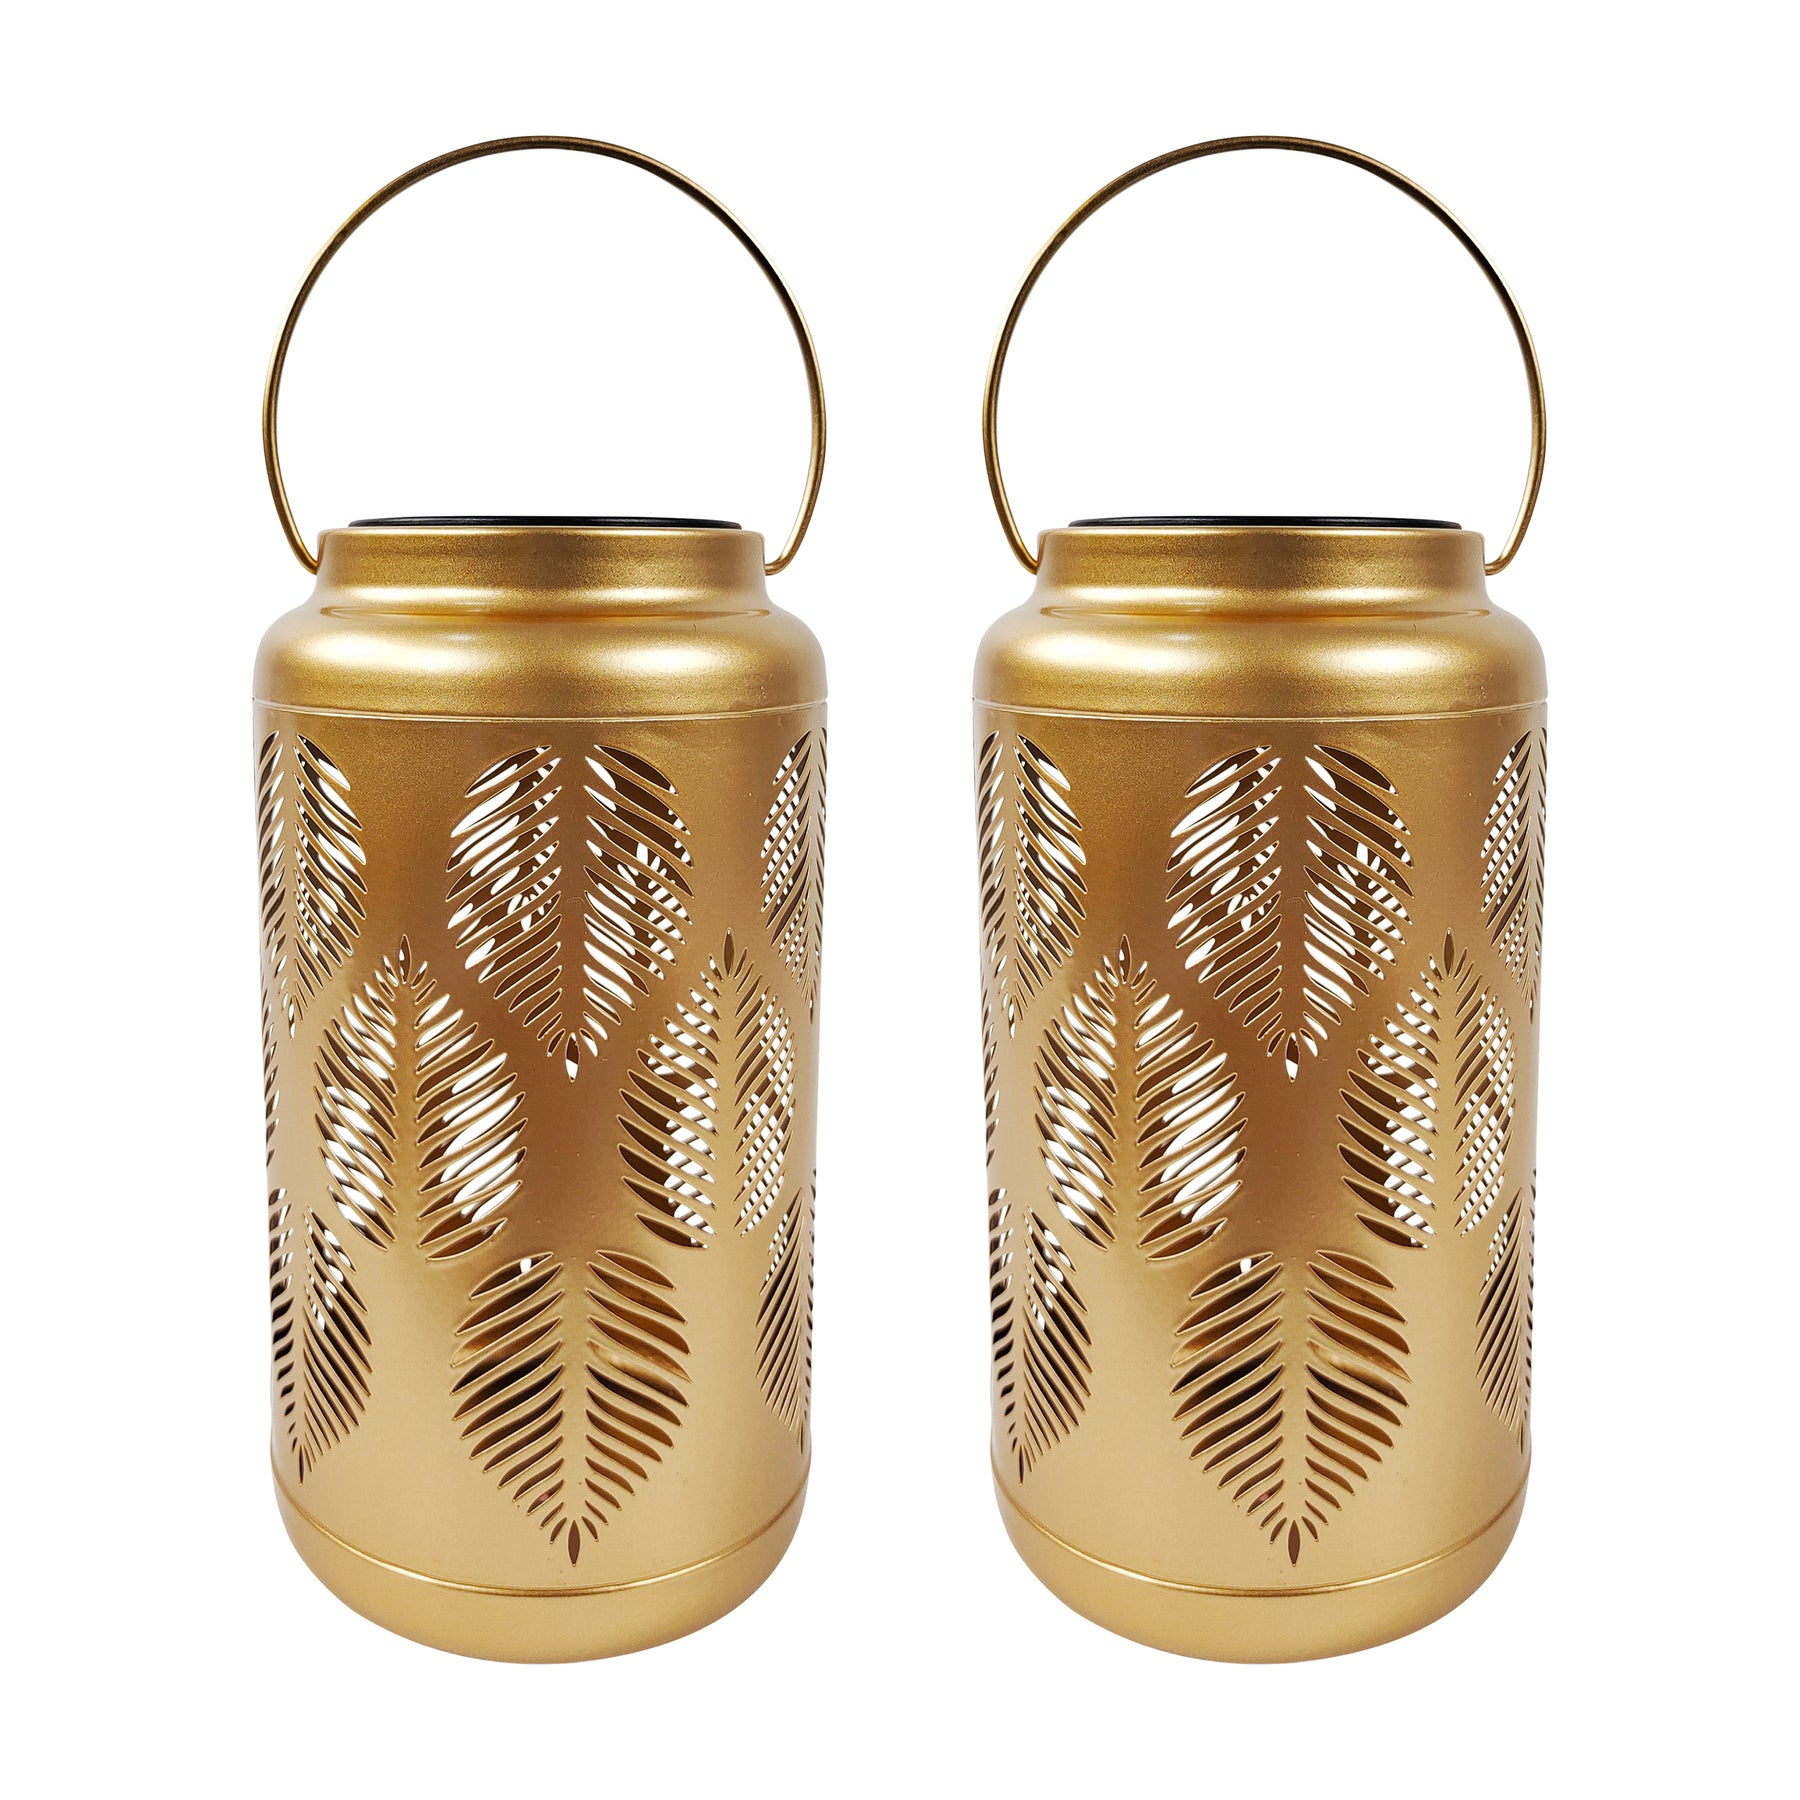 Bliss Outdoors 9-inch Tall 2-Pack Hanging and Tabletop Decorative Solar LED Lantern with Unique Tropical Leaf Design and Antique Hand Painted Finish in the gold variation.